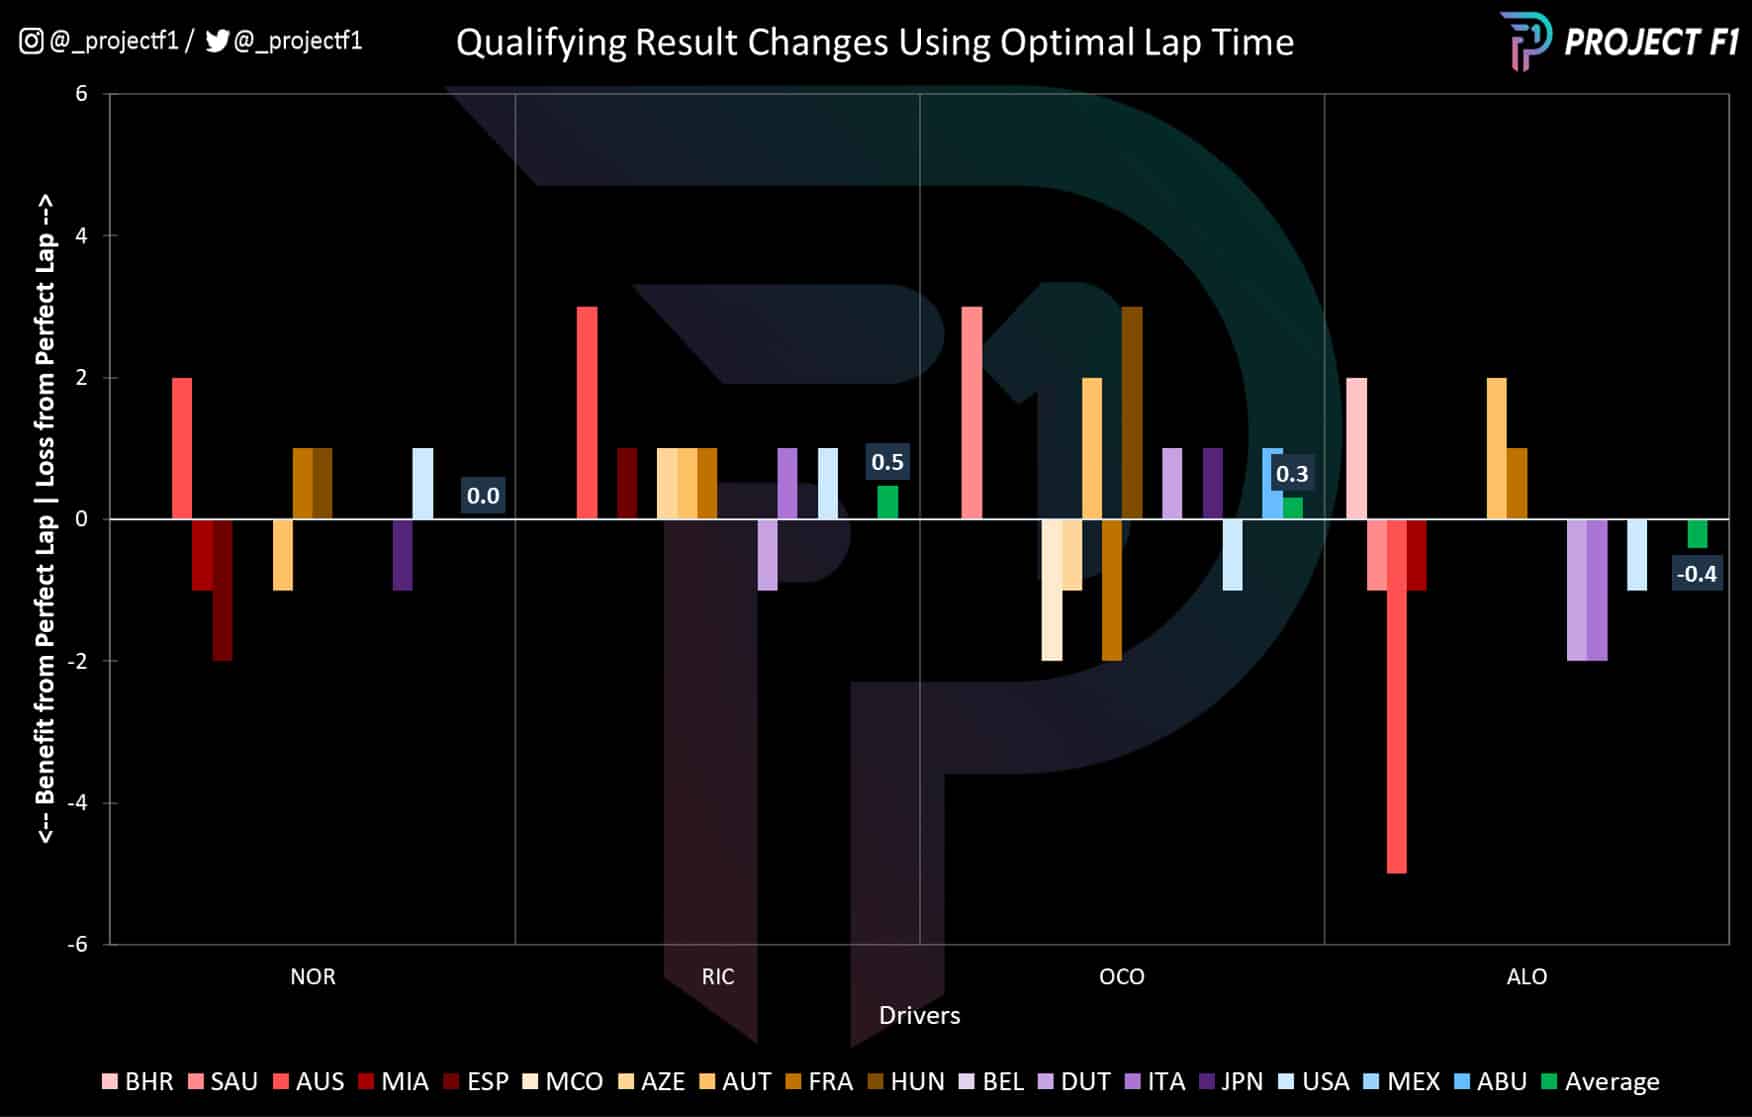 McLaren vs Alpine 2022 F1 qualifyiong results on optimal times